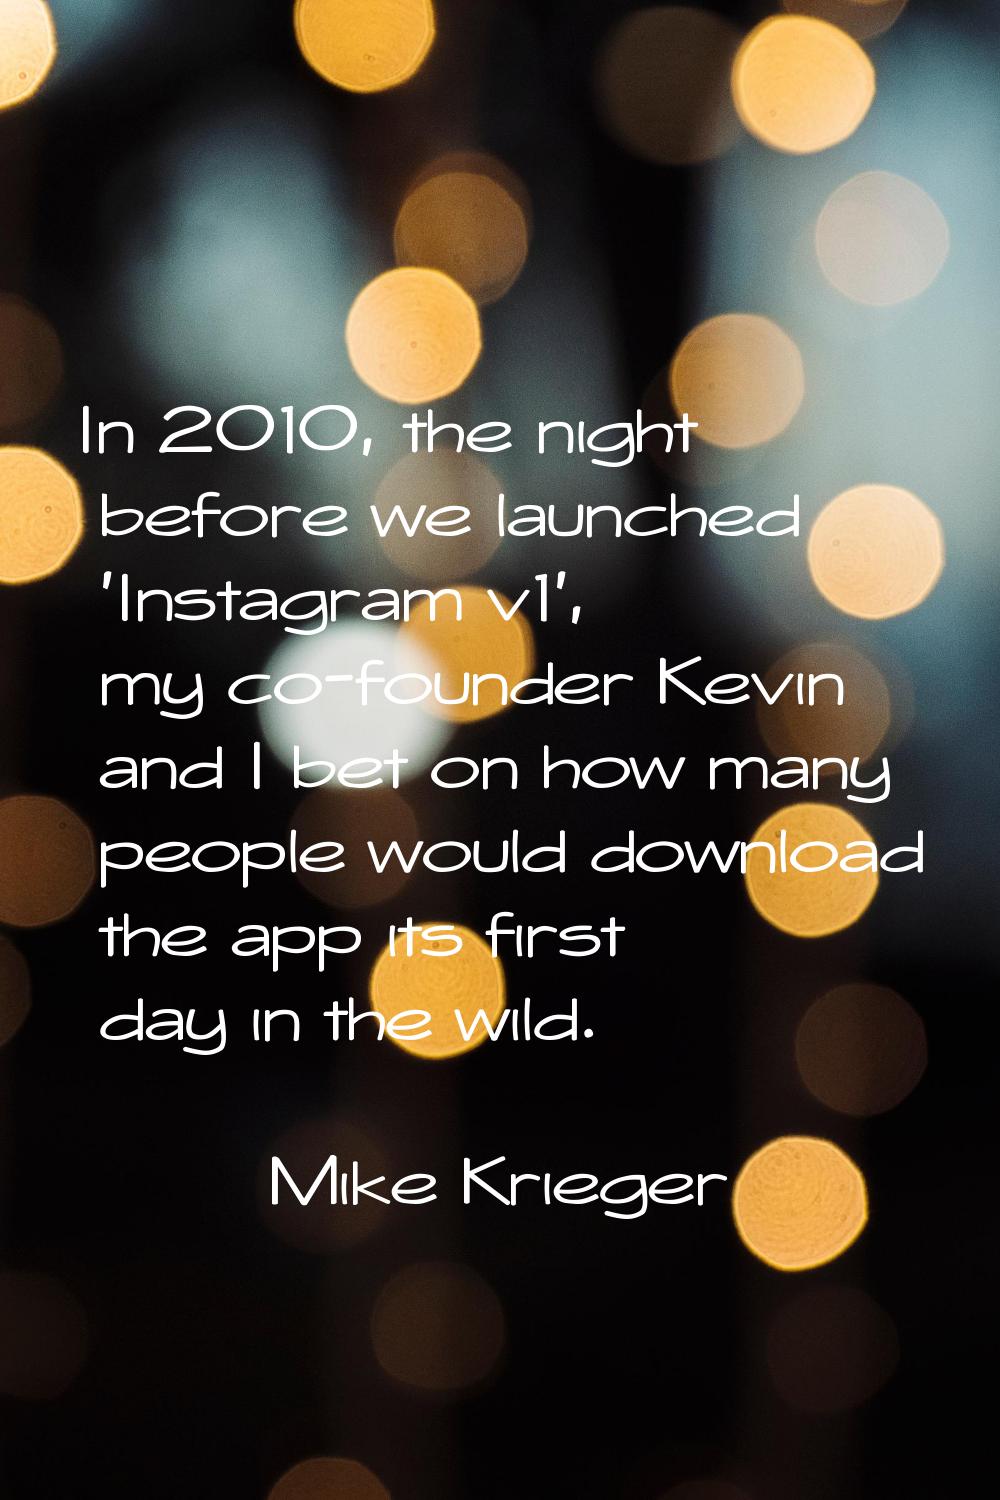 In 2010, the night before we launched 'Instagram v1', my co-founder Kevin and I bet on how many peo